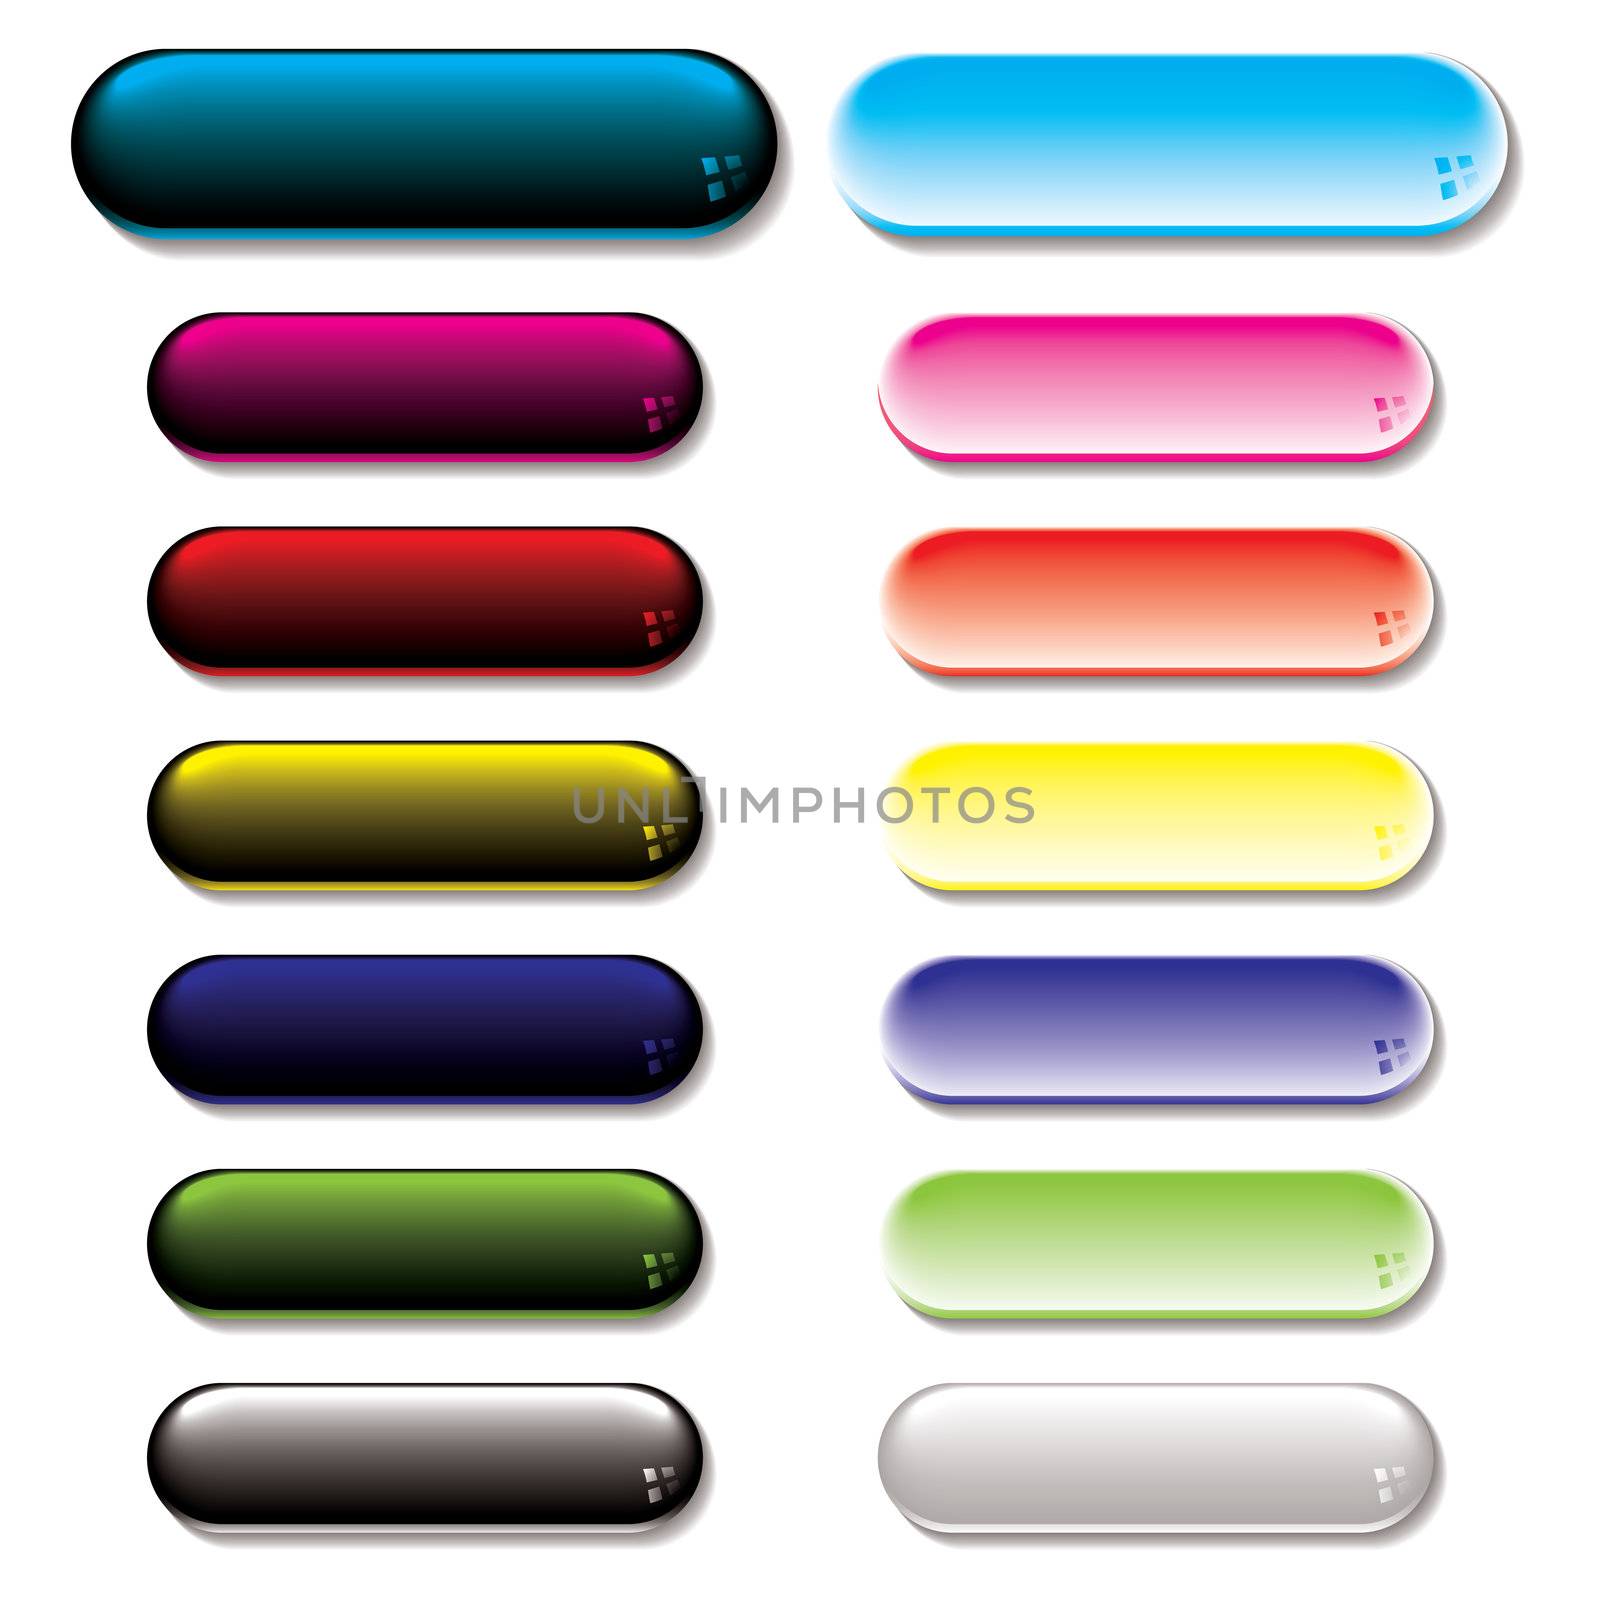 Collection of colorful gel filled buttons with shadow effect